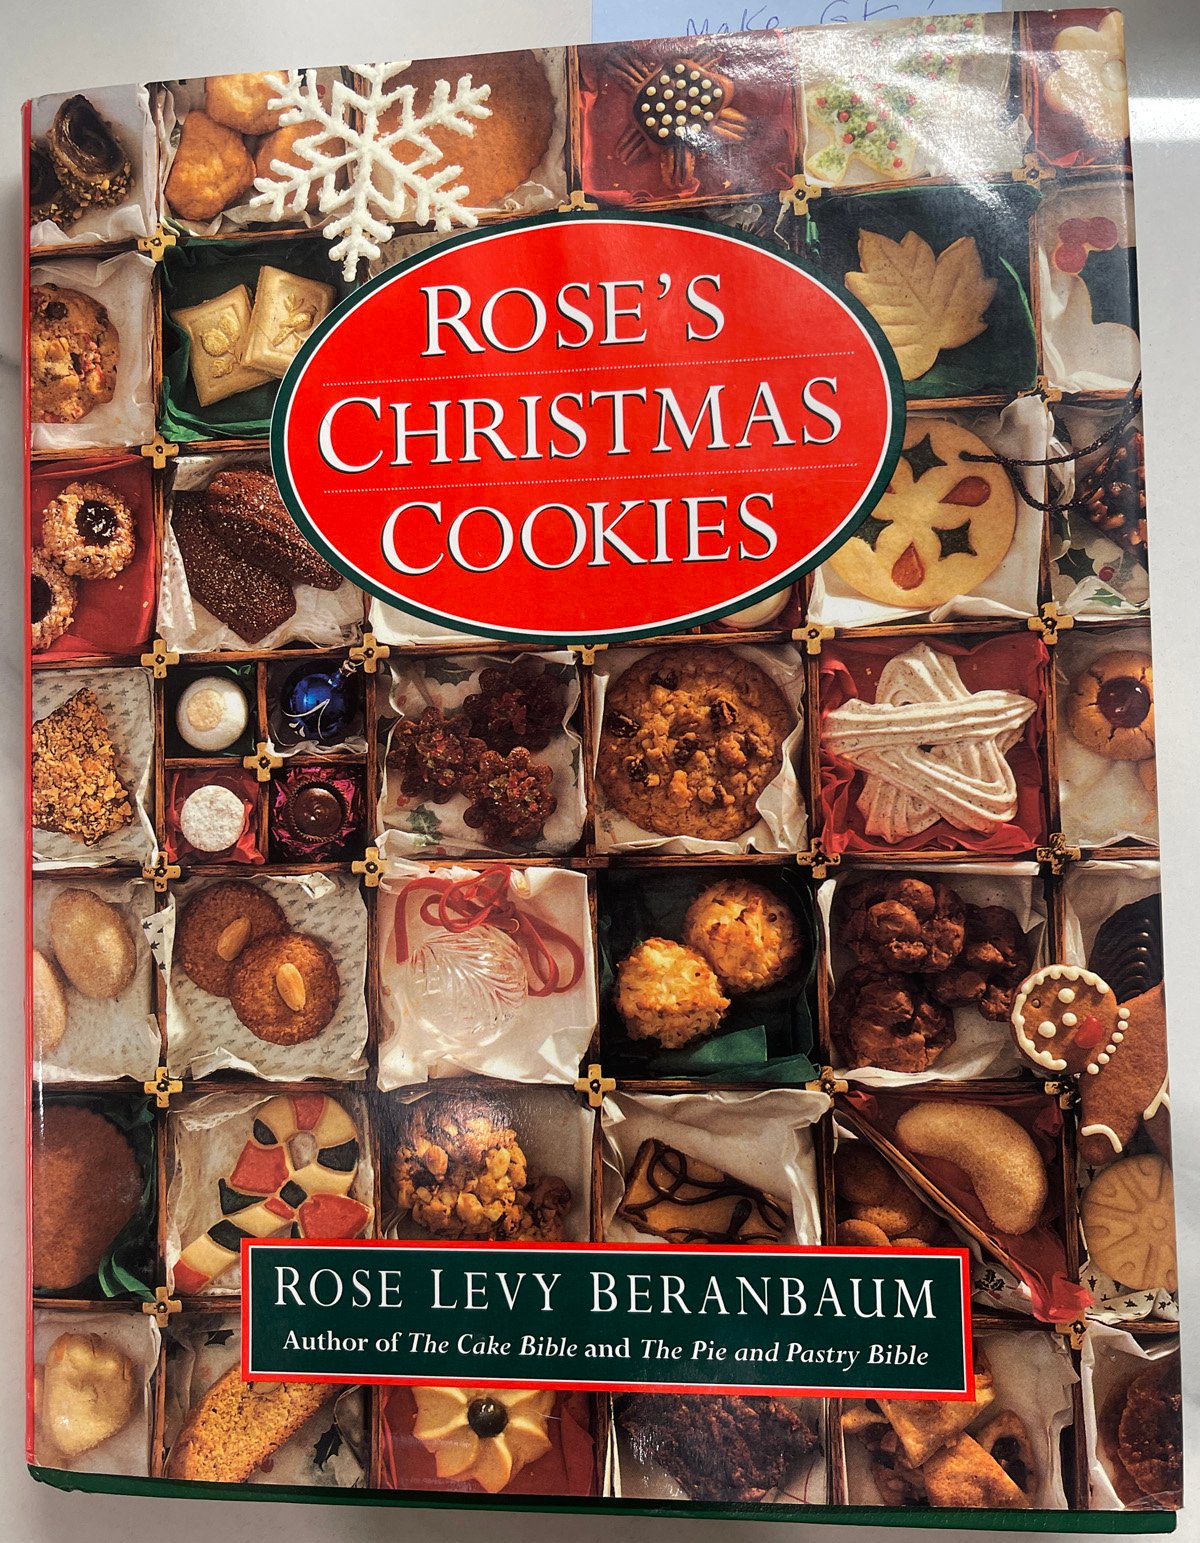 A great cookbook called Rose's Christmas Cookies.